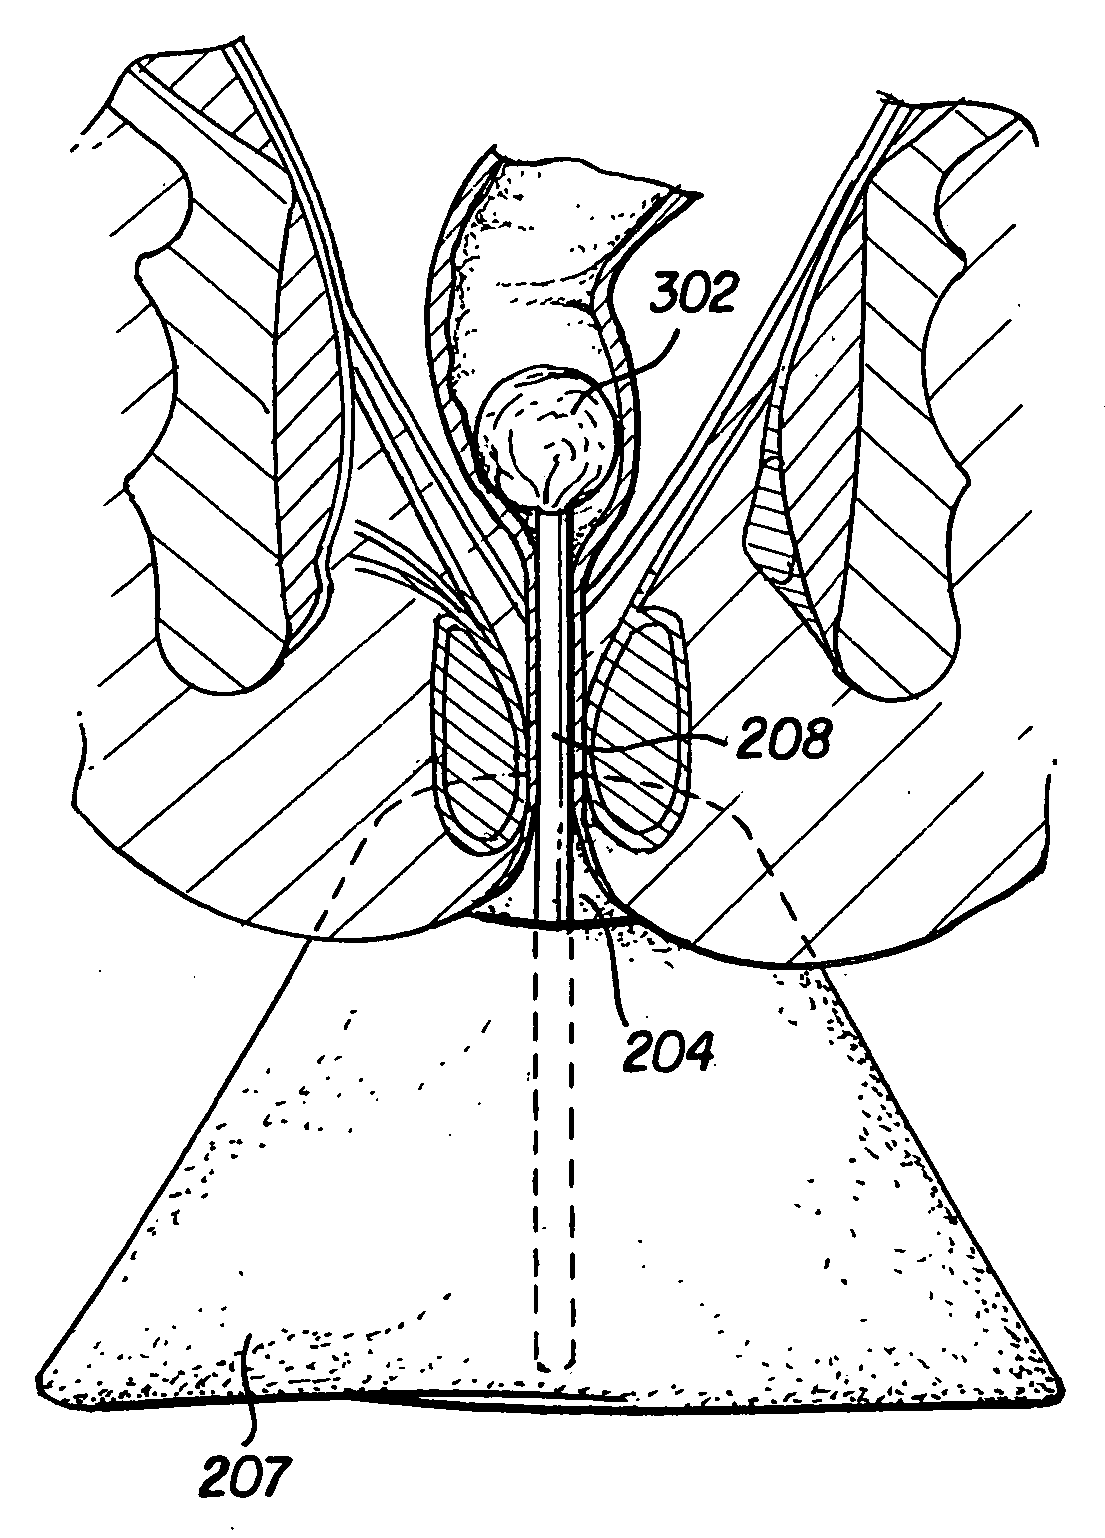 Inhibition action incontinence device and method